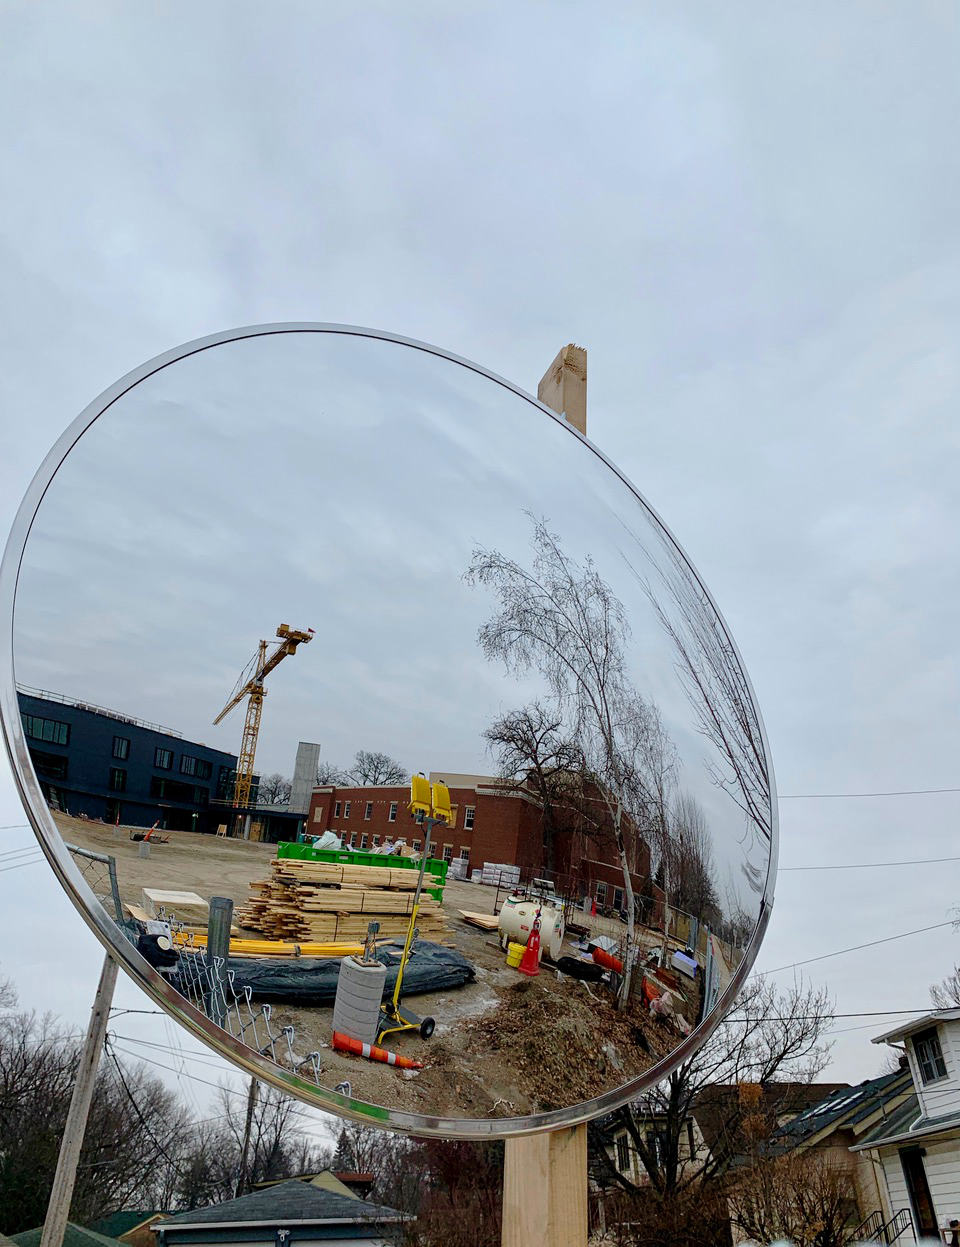 Convex mirror showing construction site with lumber, building materials, and a tall crane